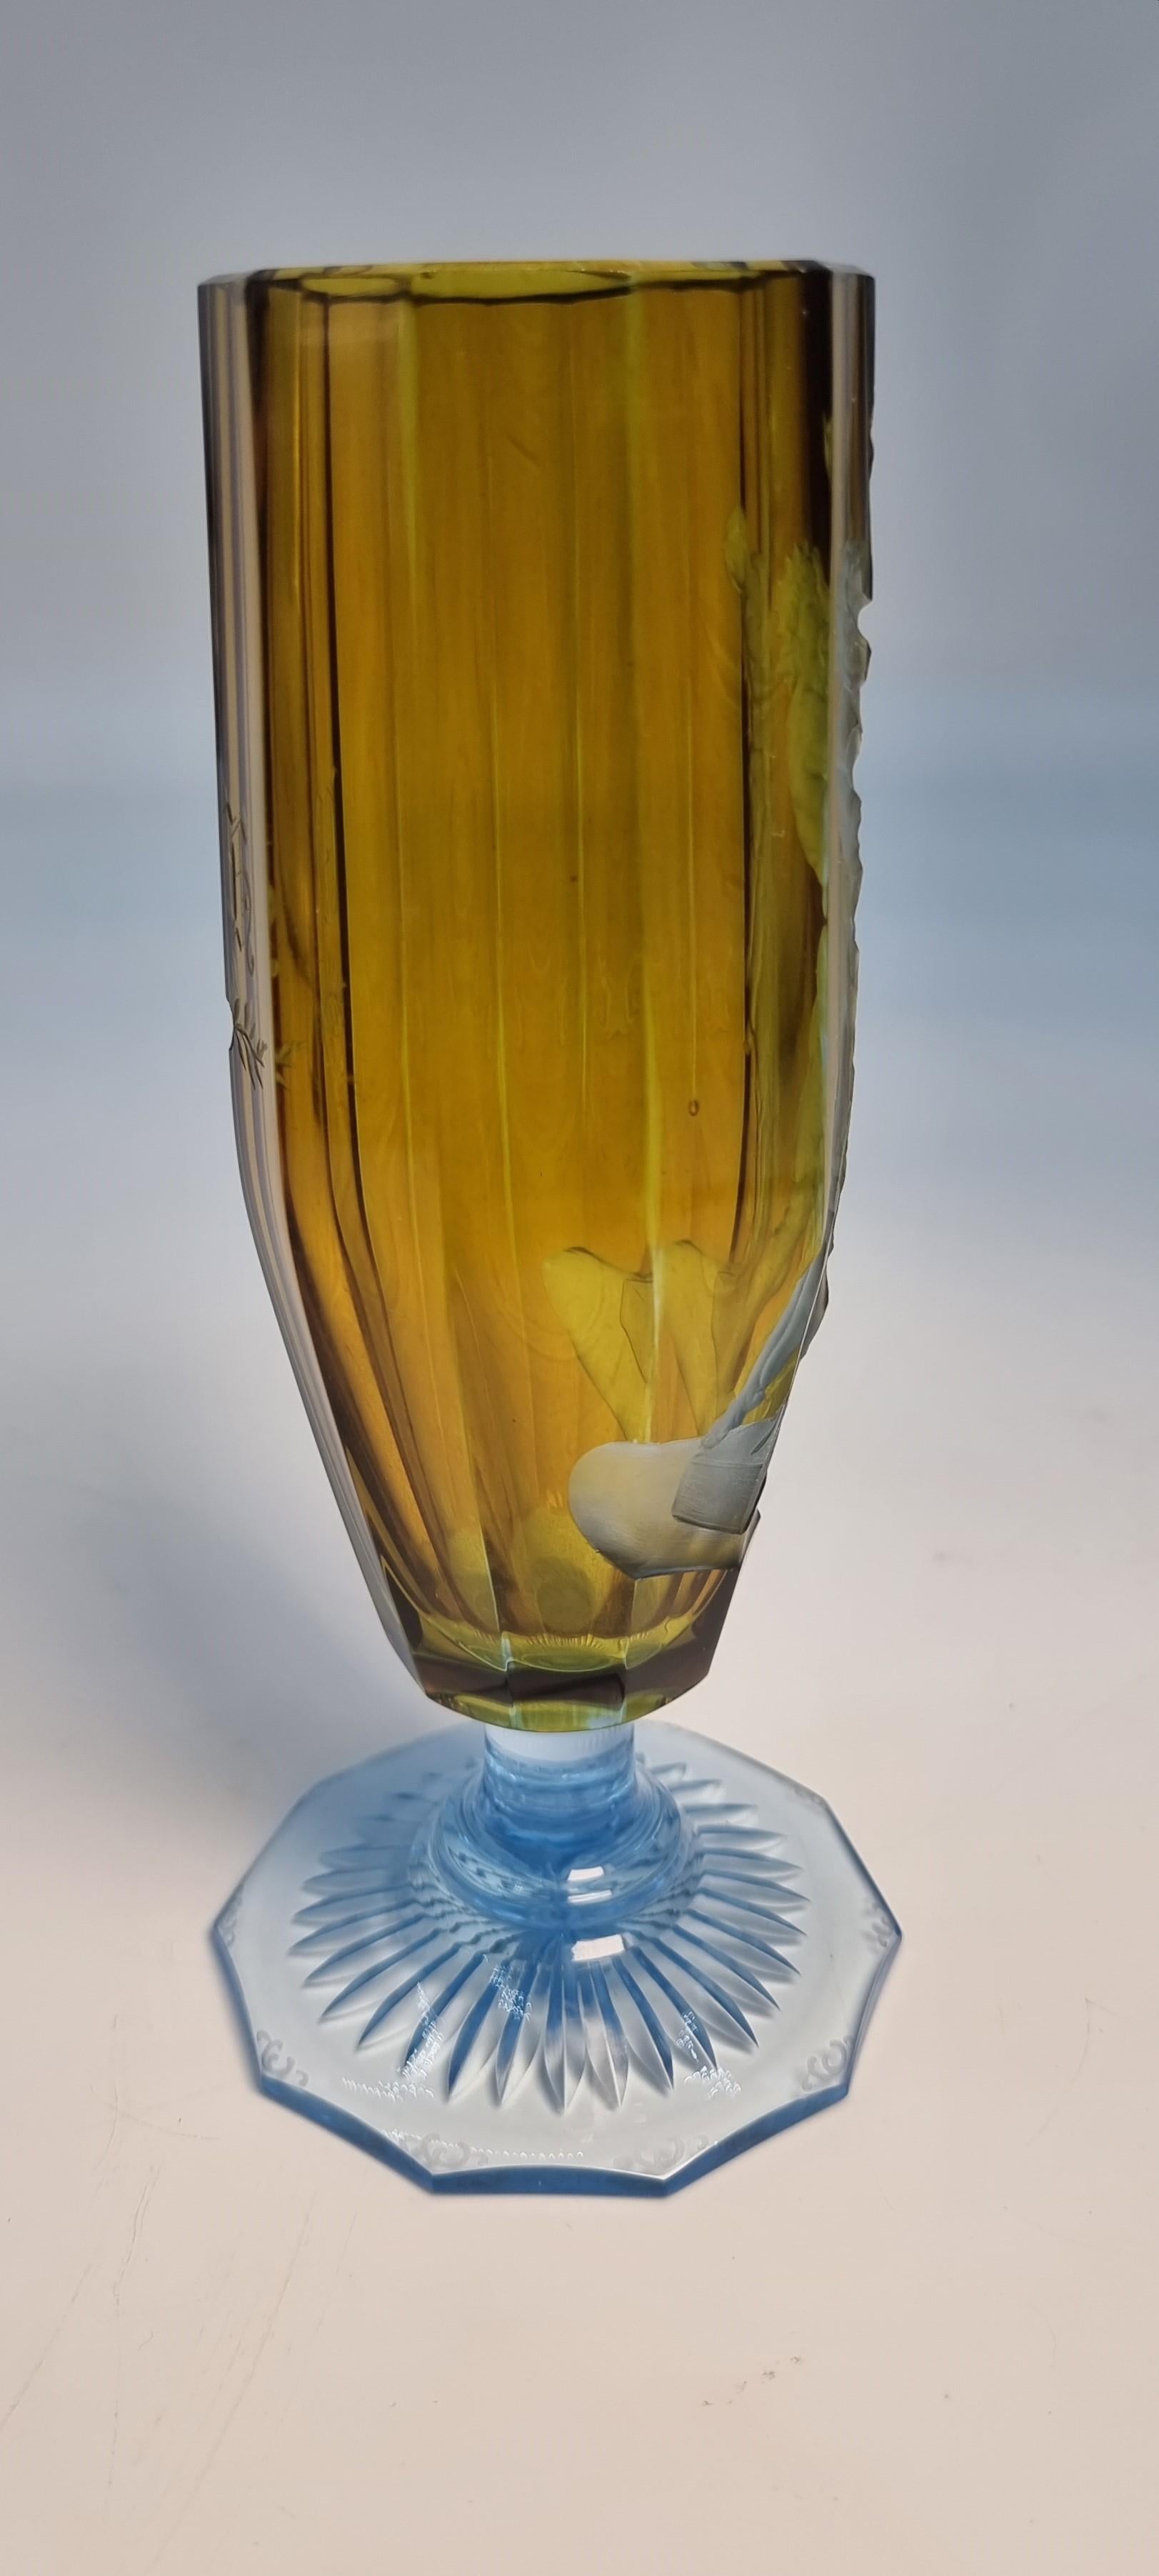 An exceptional intaglio engraved goblet with a view of the Greek god Pluto abducting Proserpina who was the daughter of the Greek god Jupiter.

This fabulous stemmed goblet is in my opinion of an exhibition quality. It is most likely English and